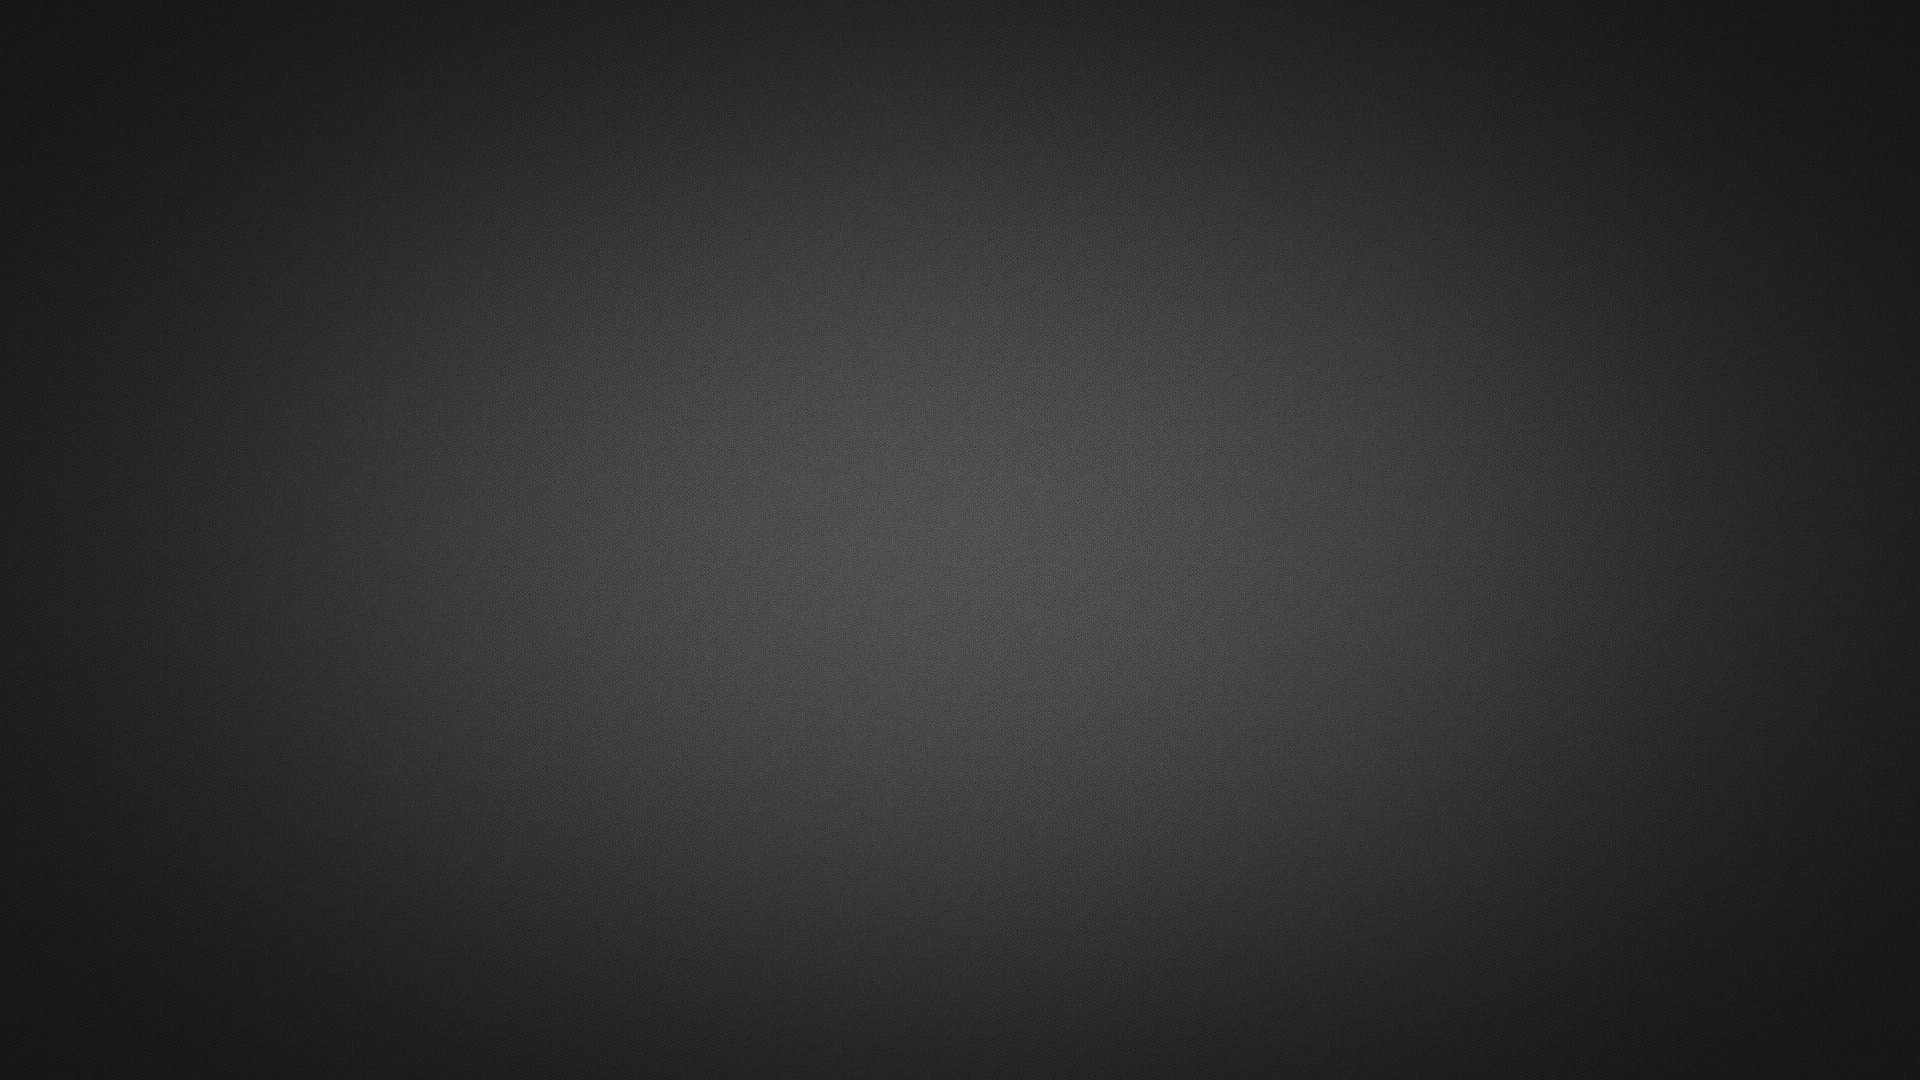 Gray Background Texture 1 Pro Services